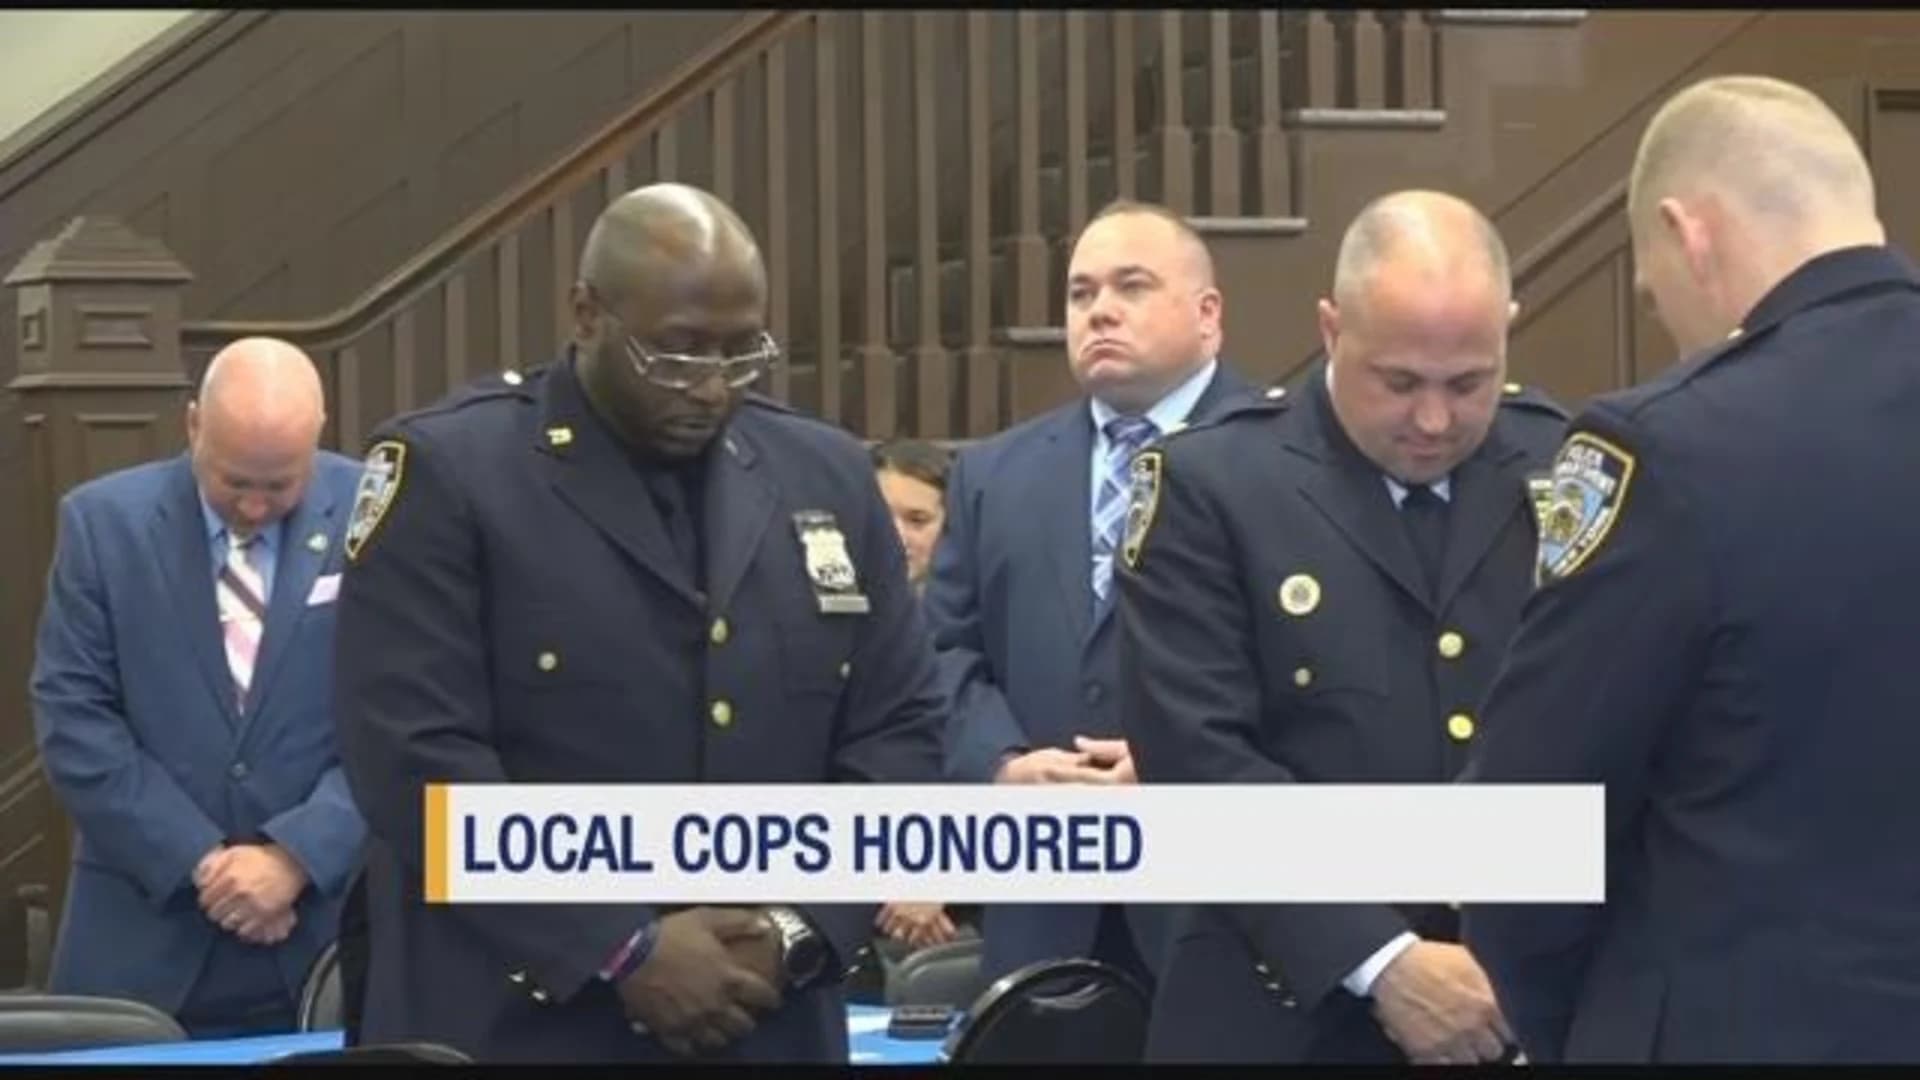 4 officers honored for work in their neighborhoods and preventing hate